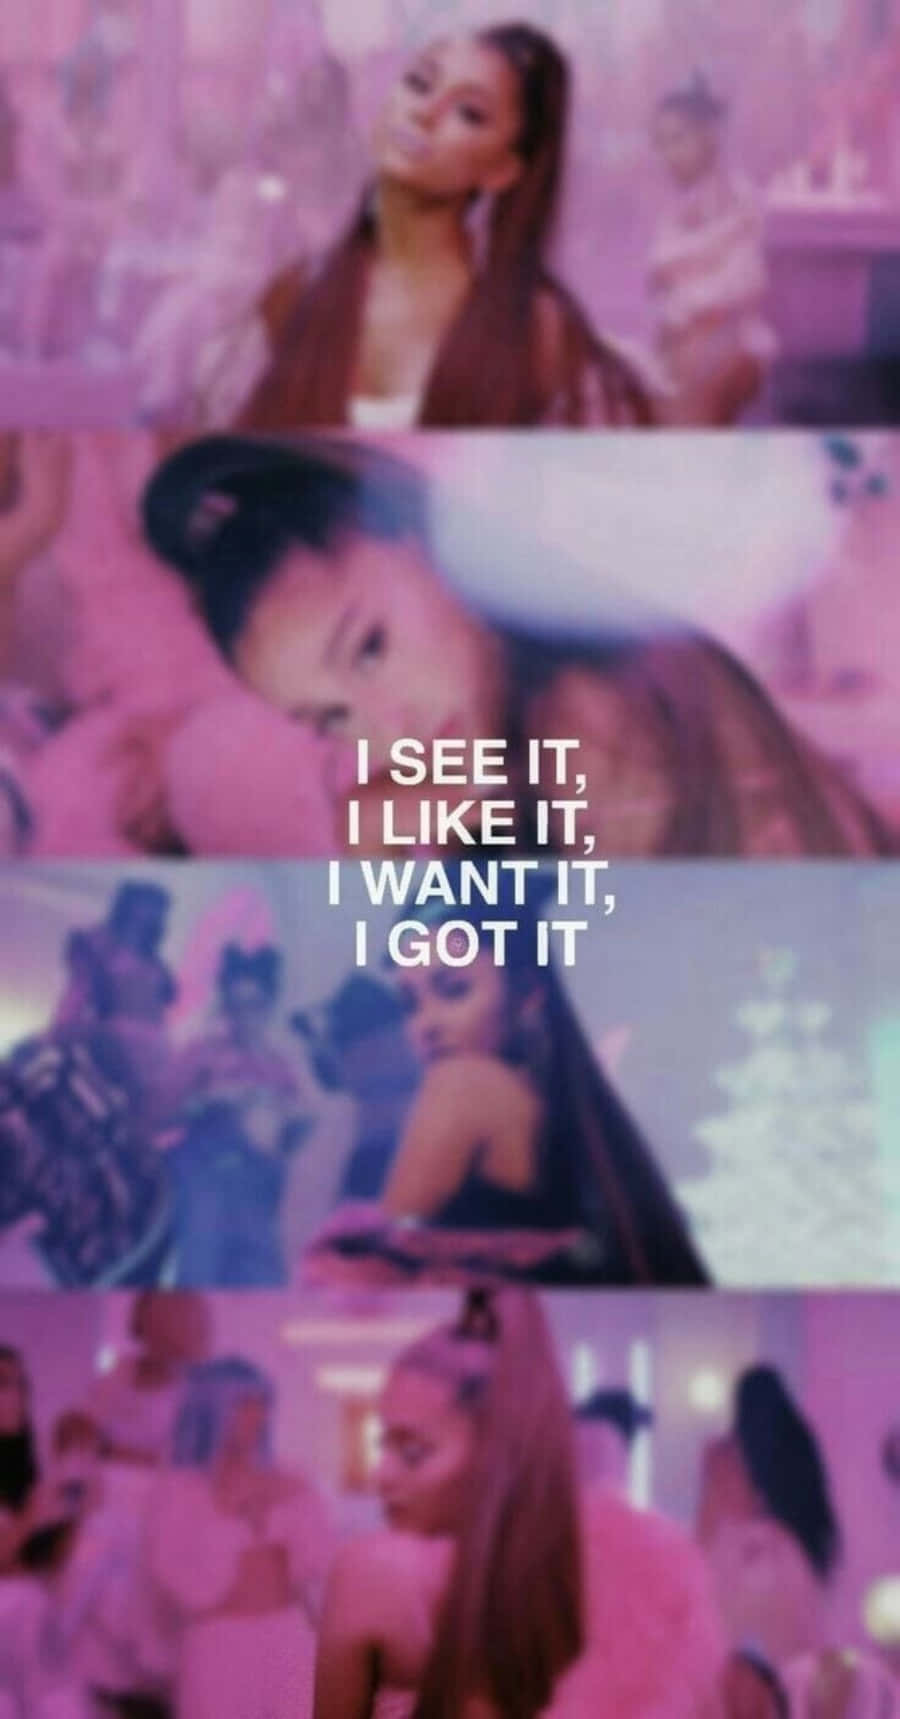 Ariana Grande – 7 rings, Lyrics and Quotes. My wrist, stop watchin', my  neck is… - Entertainment Movie Music | Music quotes lyrics, Lyric quotes,  Song lyric quotes